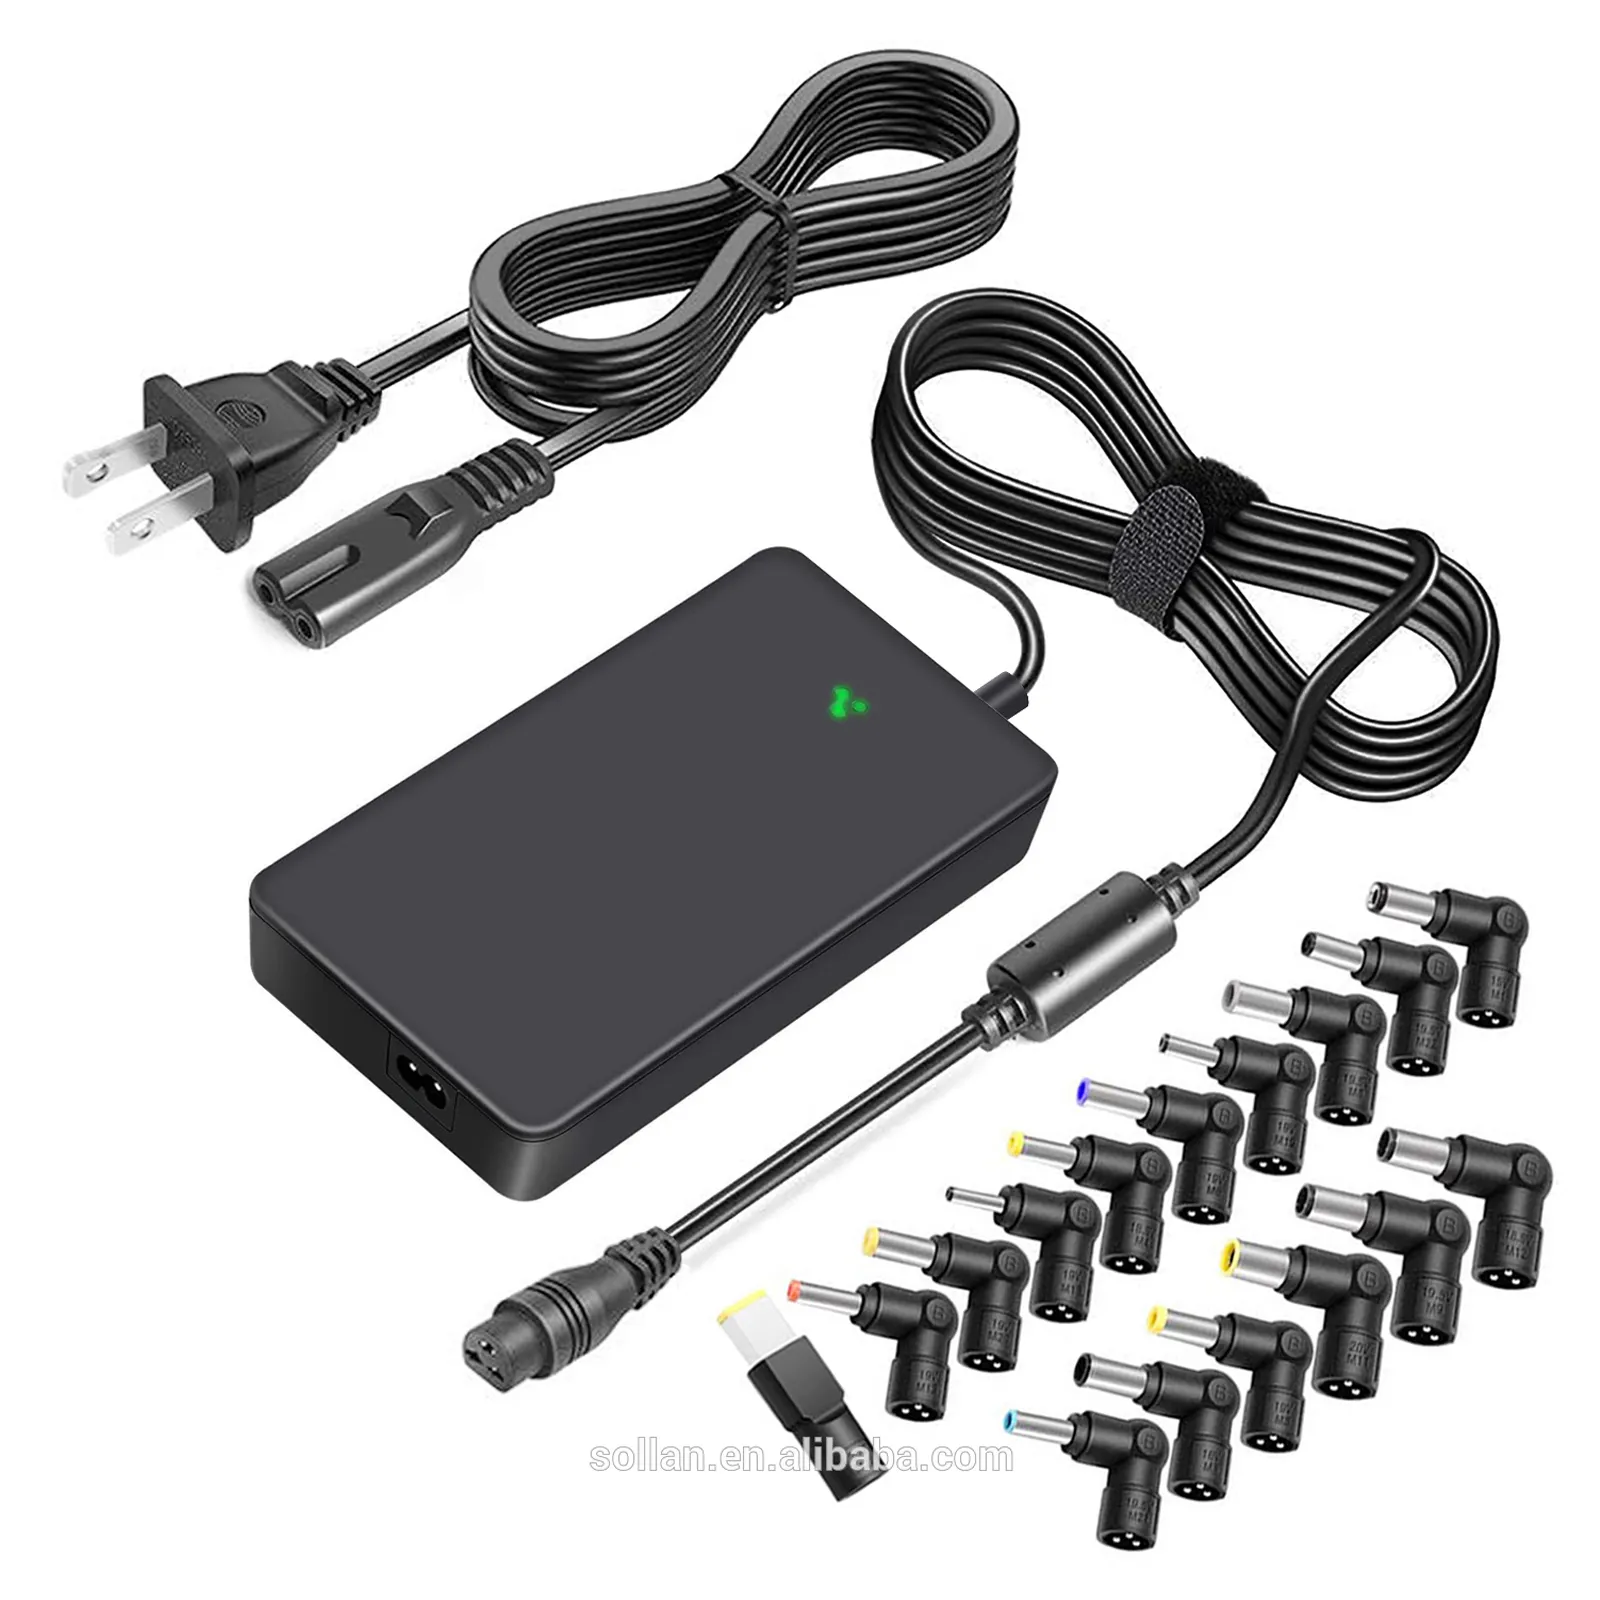 Fast Deliver 15V-20V 90W universal laptop charger compatibility with 16 tips for Acer/Dell/HP/Lenovo/Huawei laptop